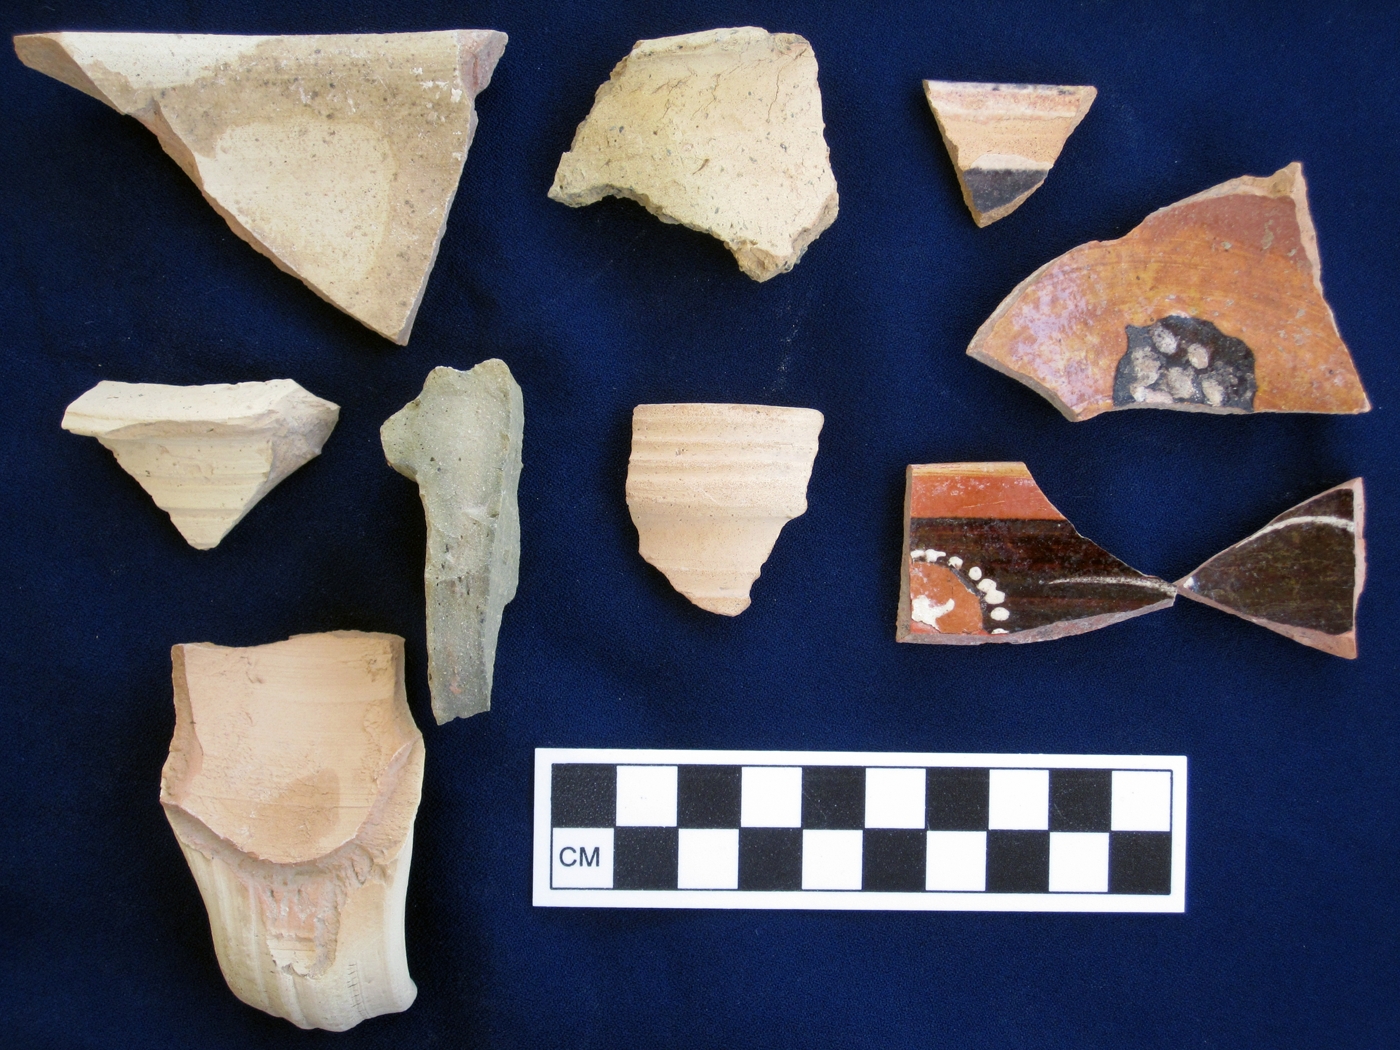 A selection of pottery sherds from Shehitli Depe, CMS Site 1, dating to the Sasanian and Early Islamic periods.